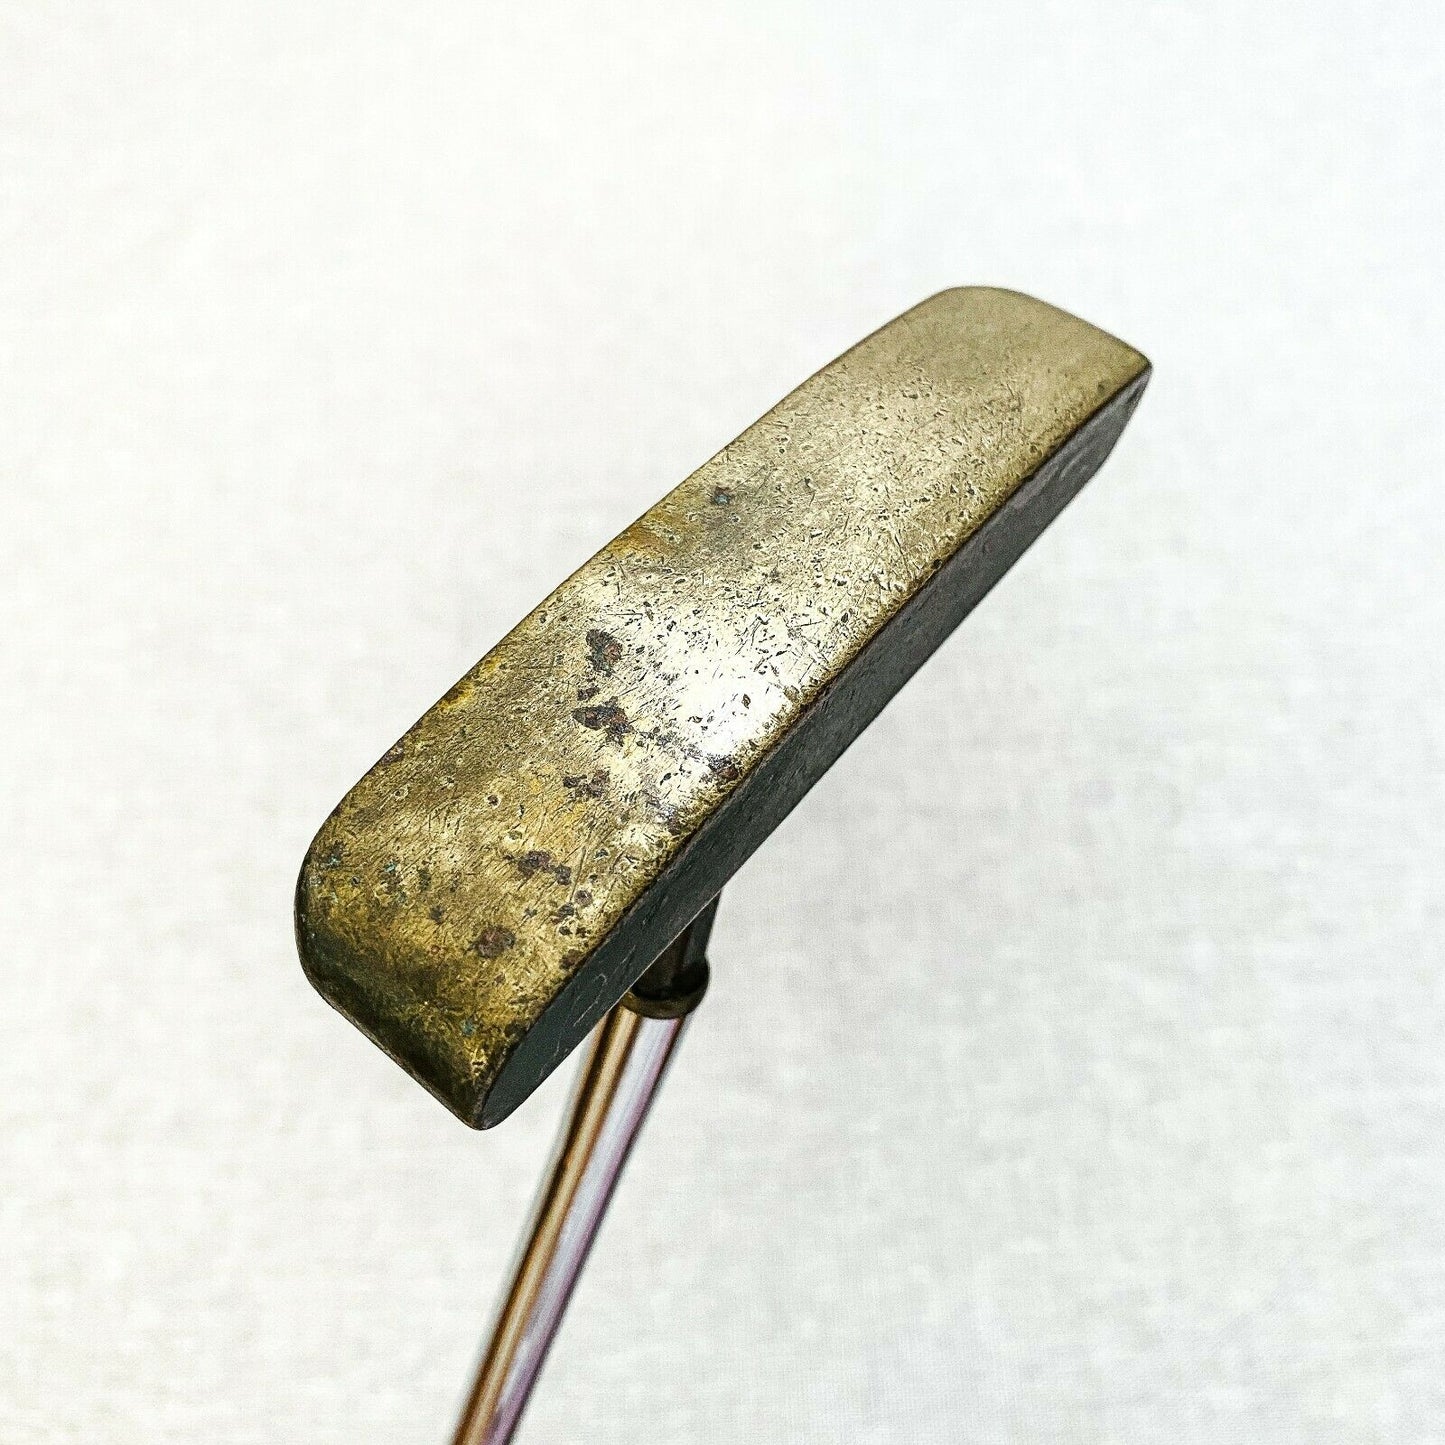 PING O-Blade Putter. 33.5 inch - Average Condition, Free Post # 9629